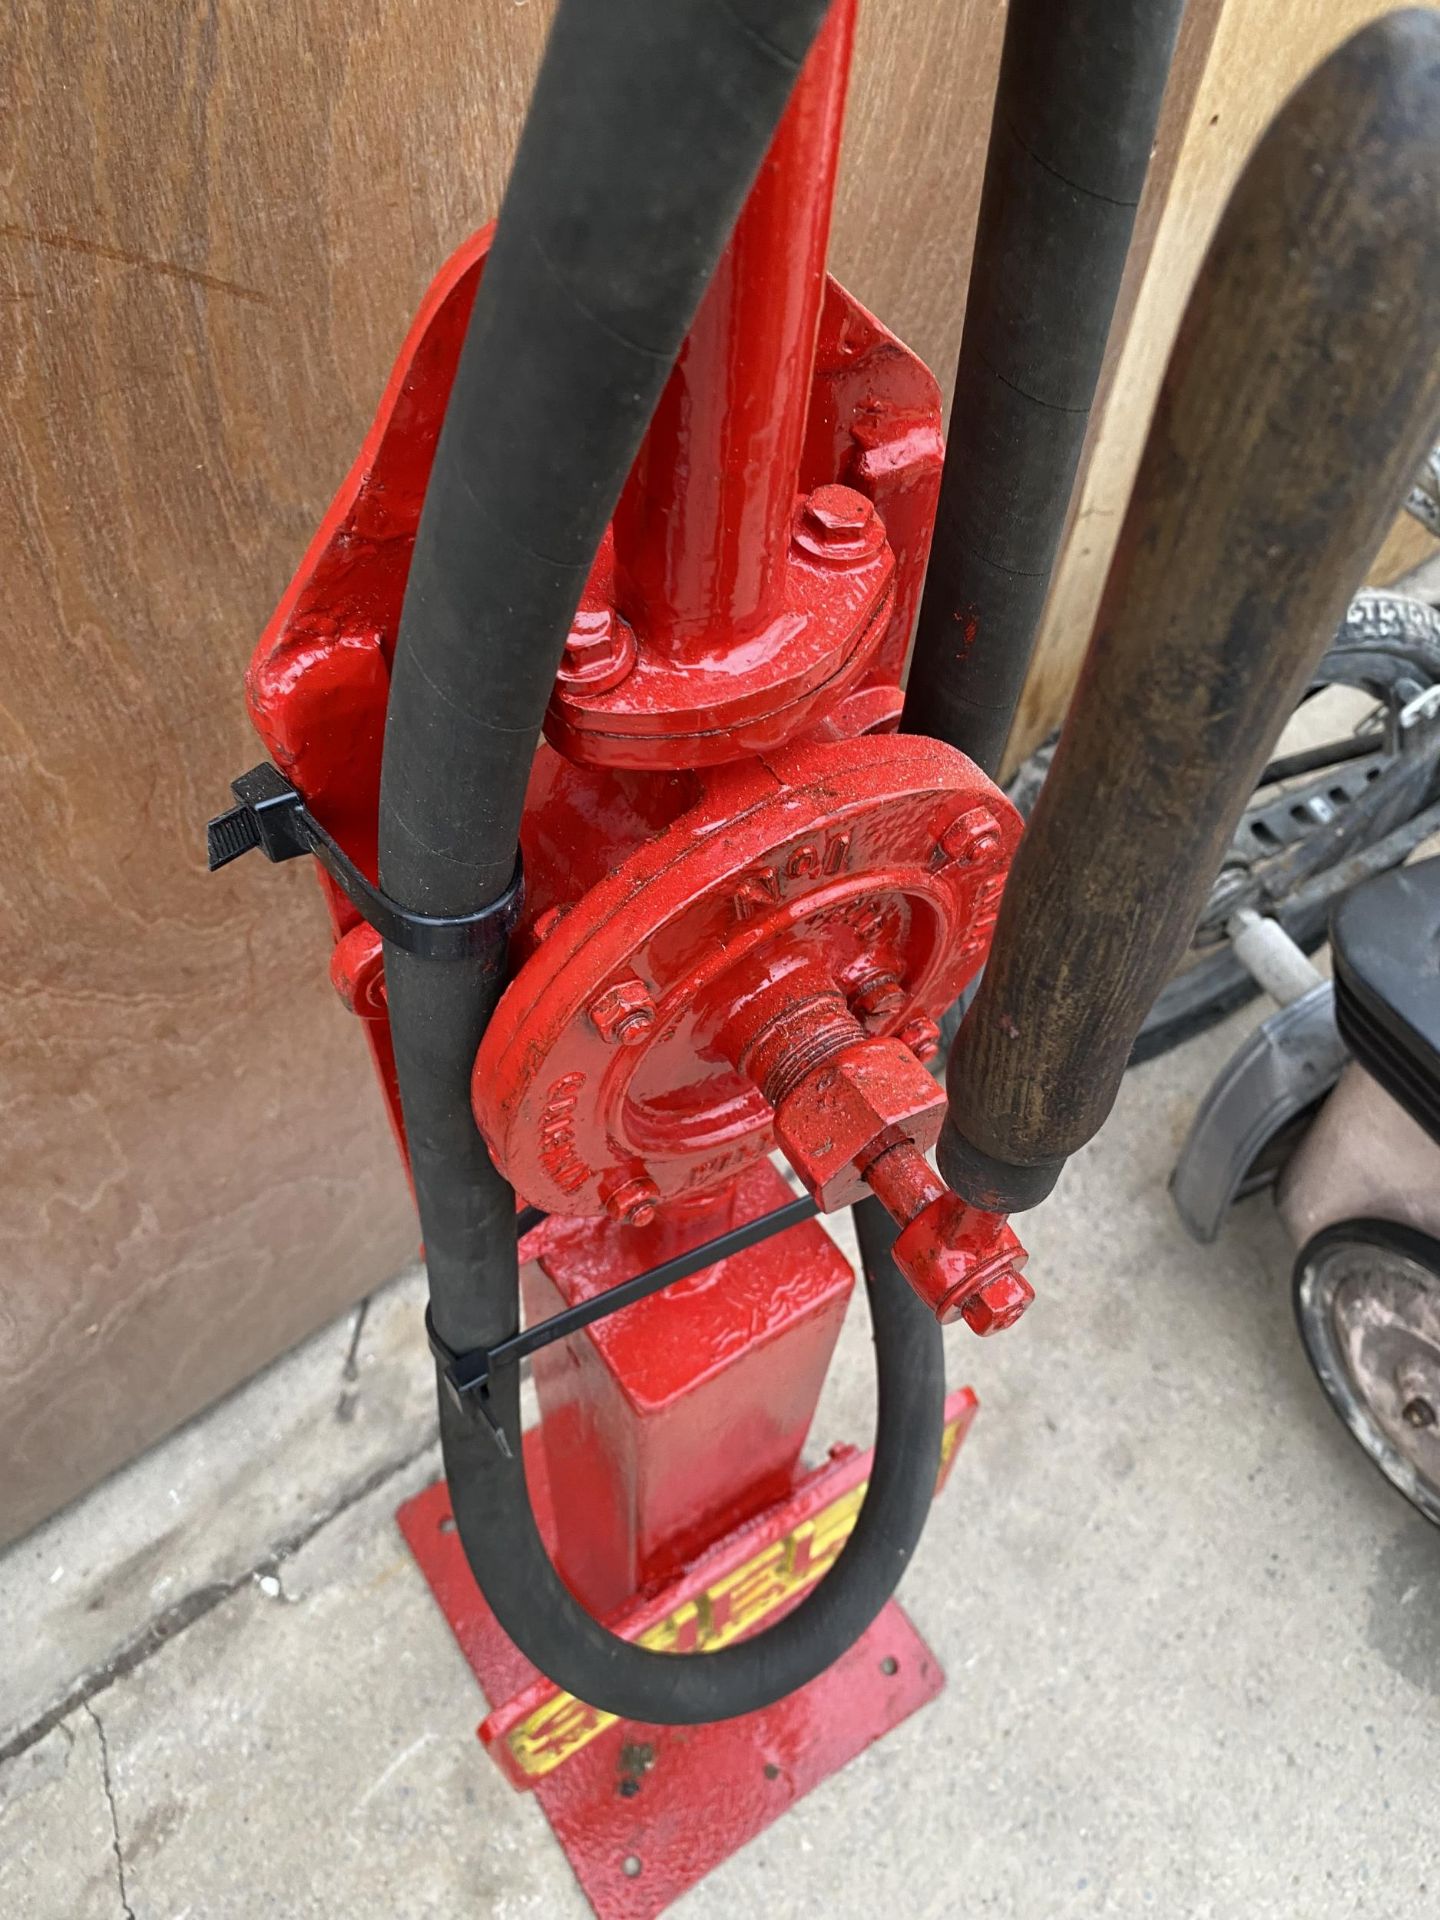 A SHELL PETROL PUMP WITH BRASS NOZZLE - Image 5 of 6